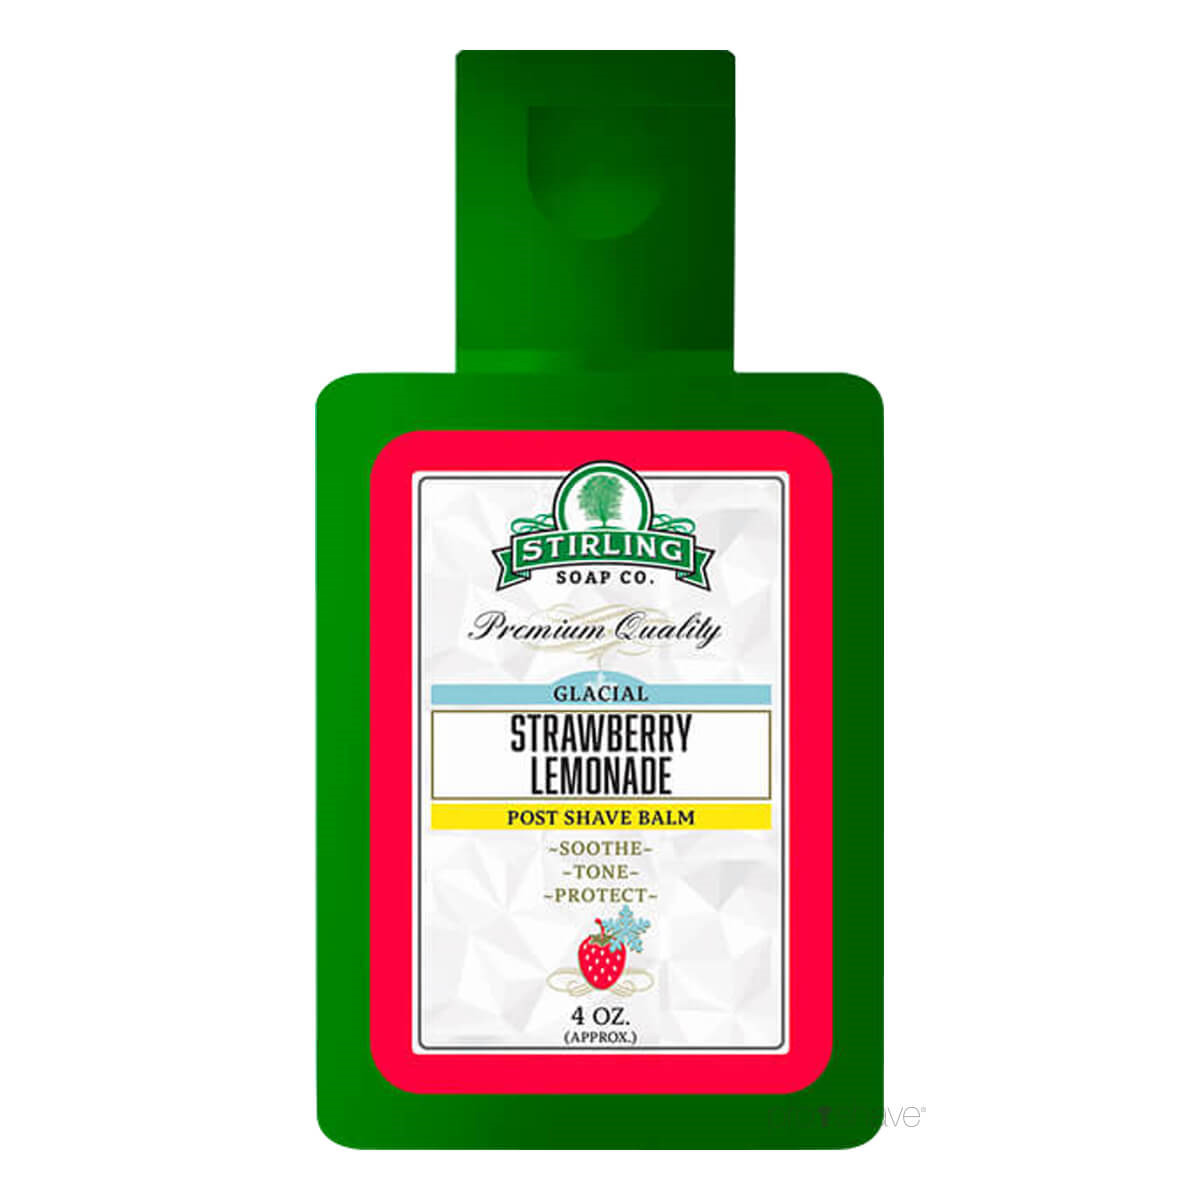 Stirling Soap Co. Aftershave Balm, Glacial - Strawberry Lemonade, 118 ml.